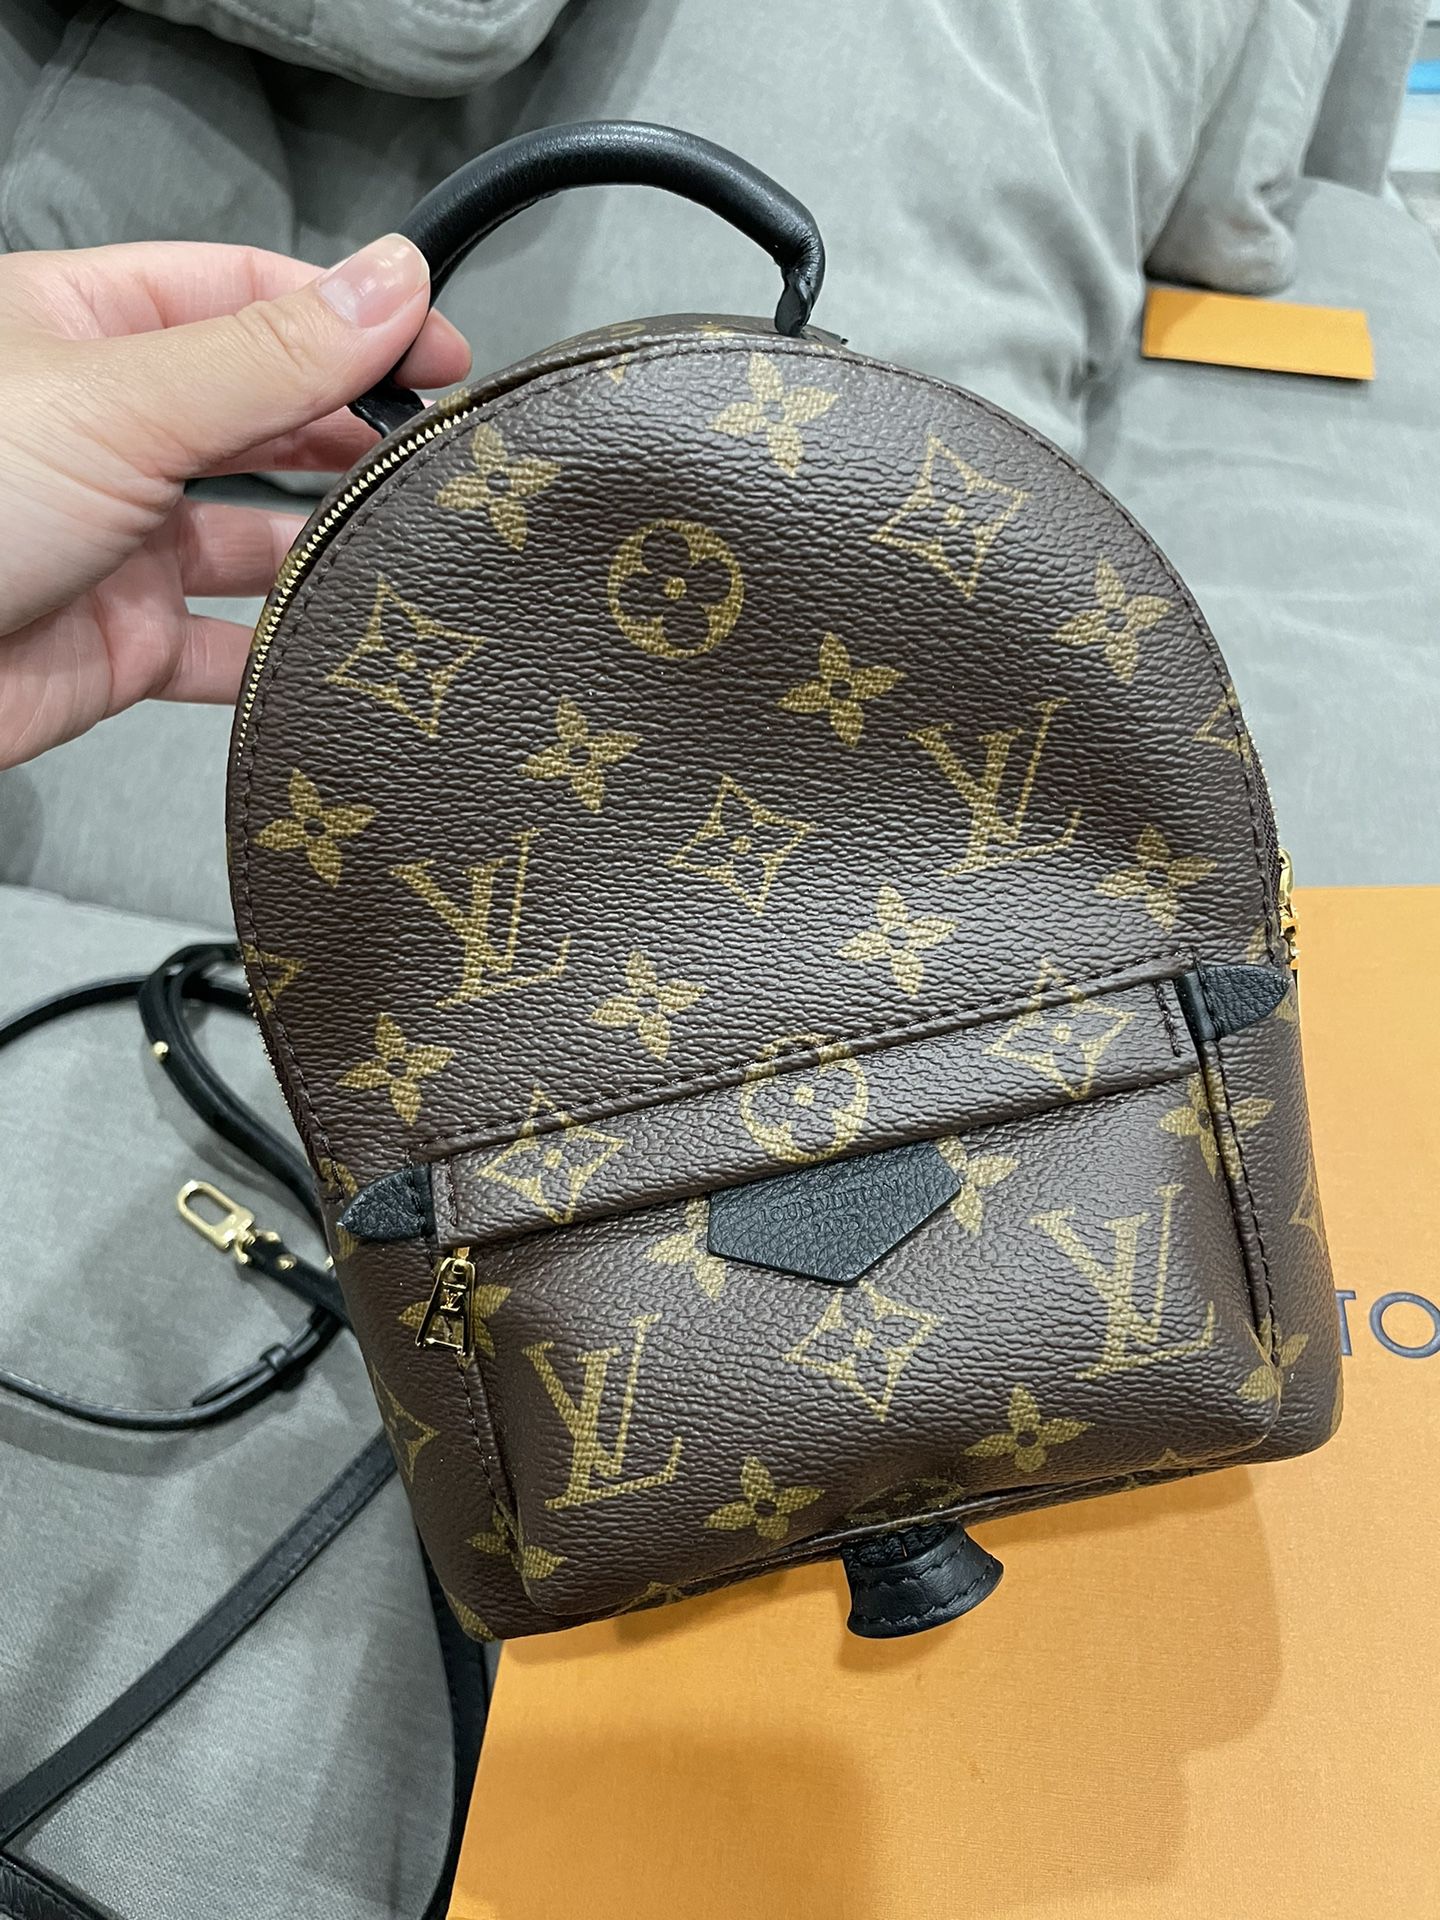 PALM SPRINGS MINI backpack for Sale in Las Vegas, NV - OfferUp